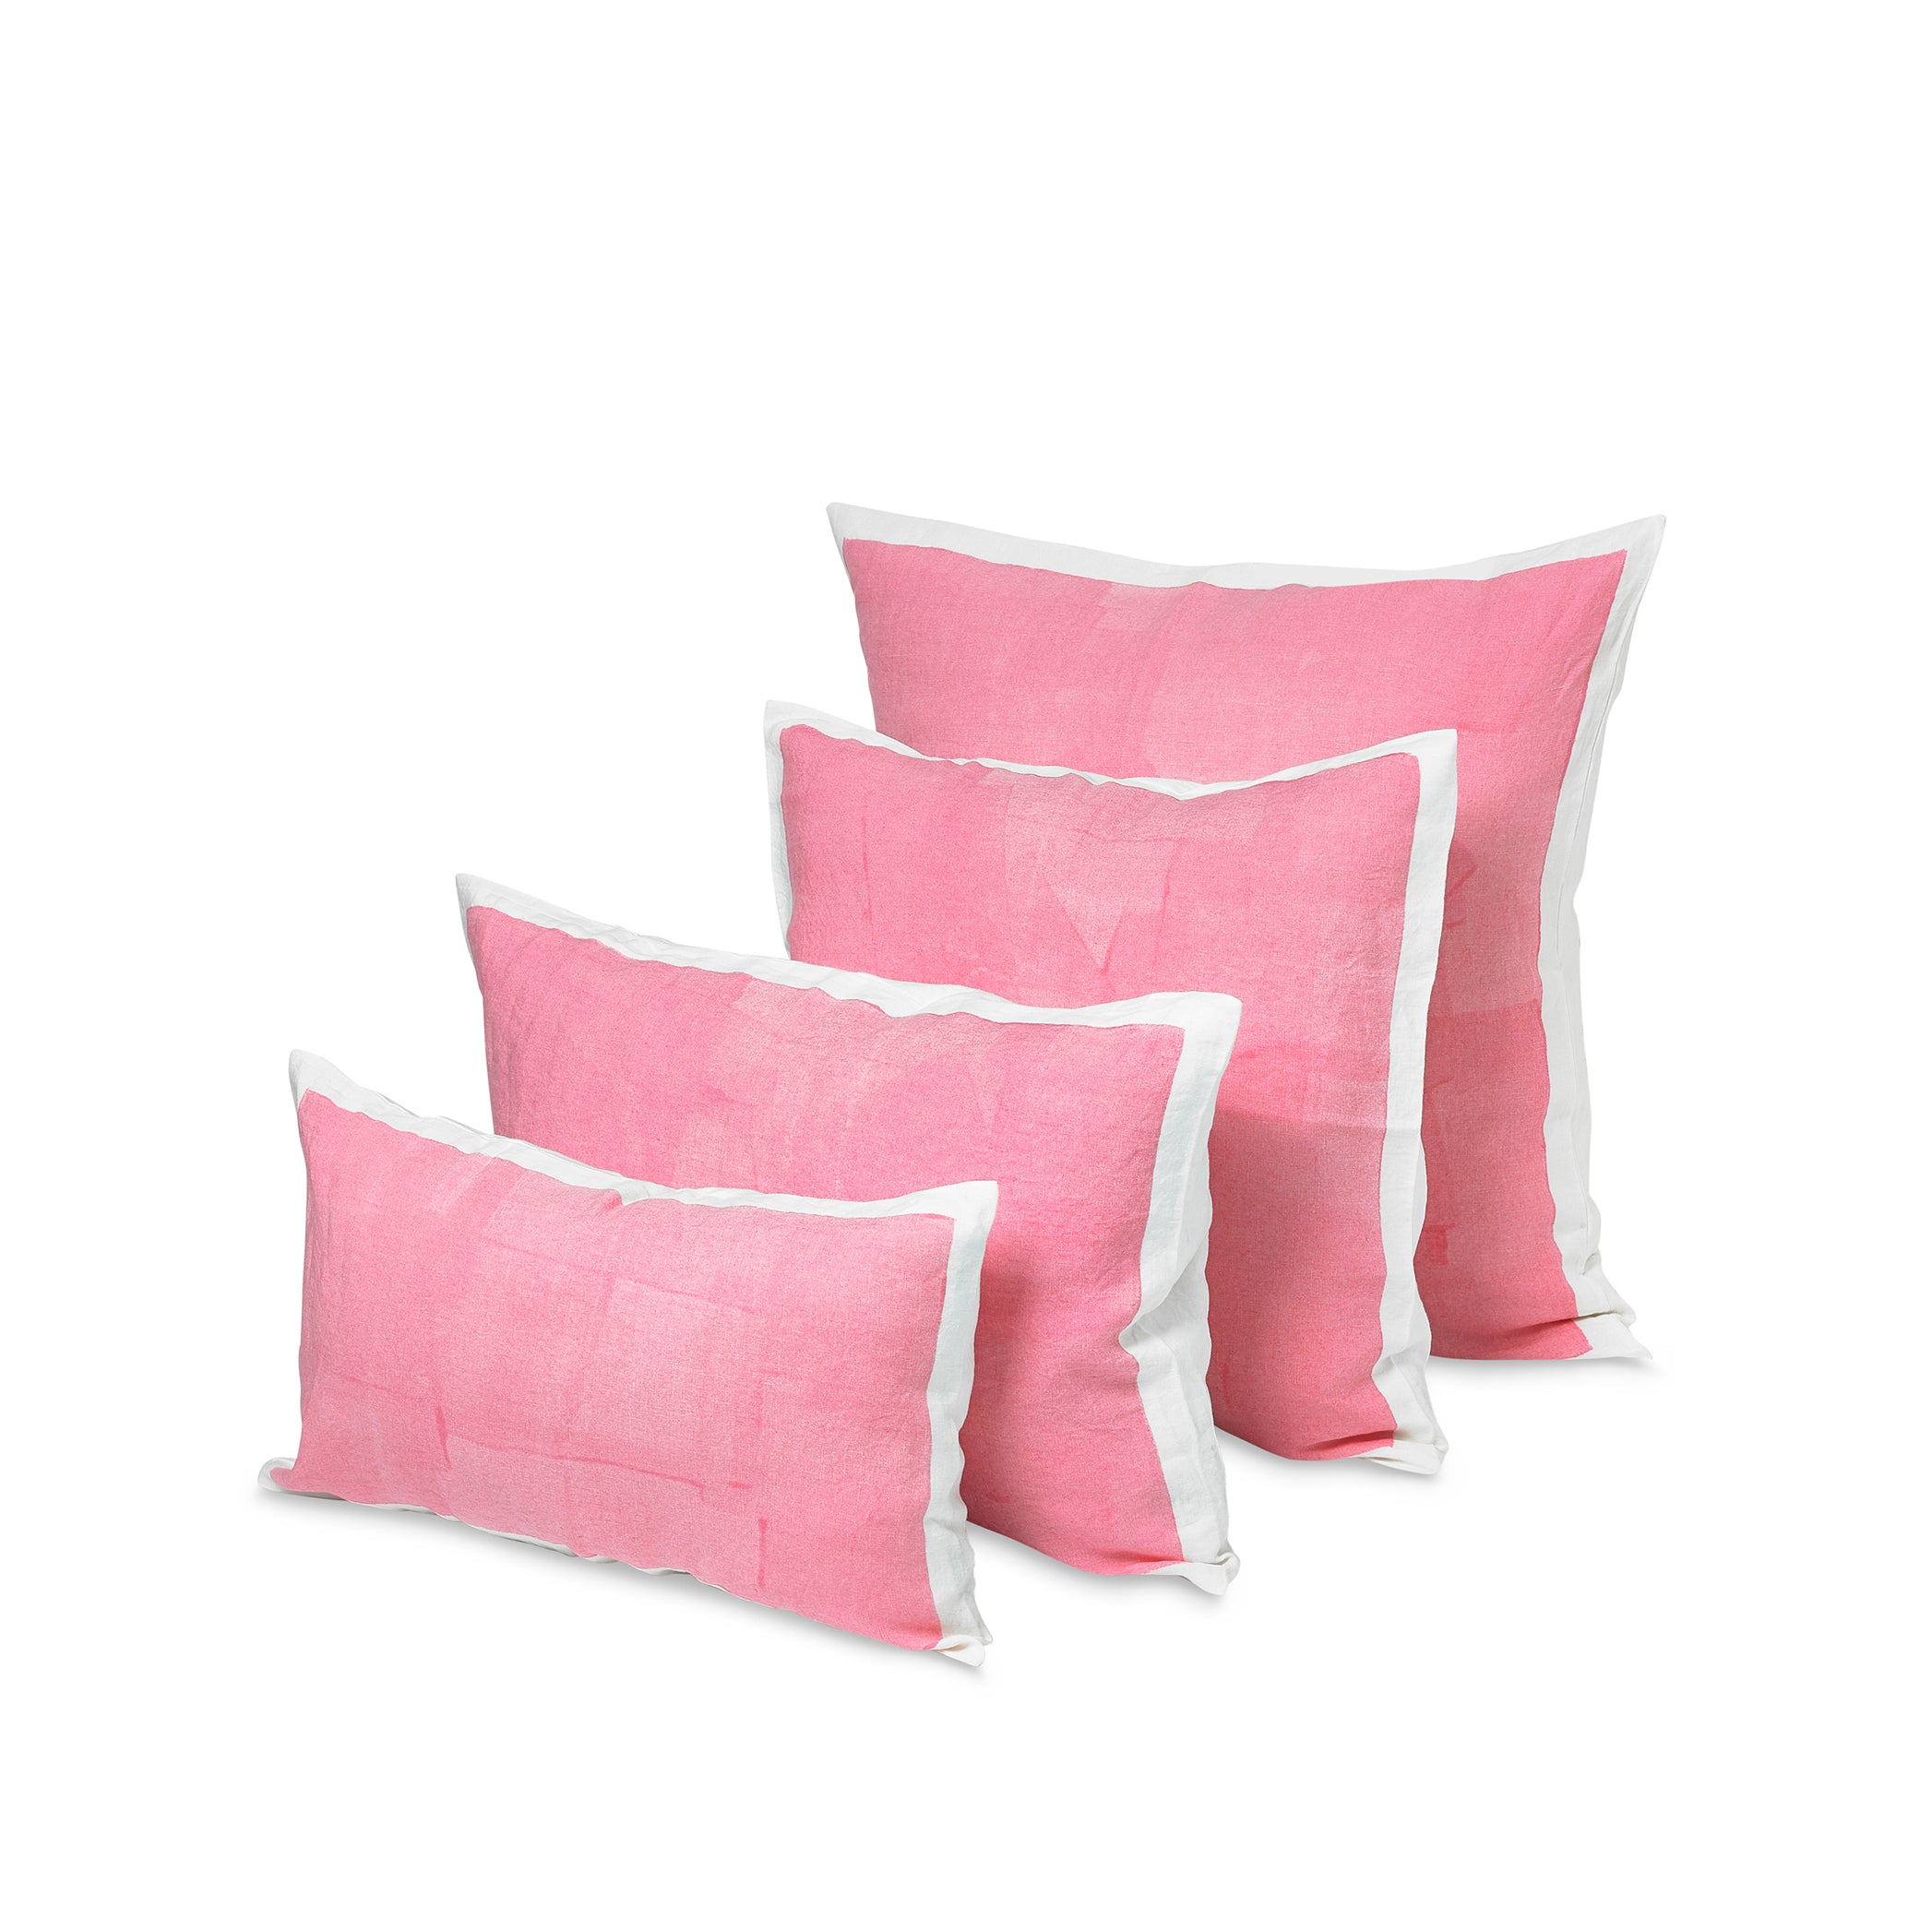 Hand Painted Linen Cushion in Rose Pink, 50cm x 50cm